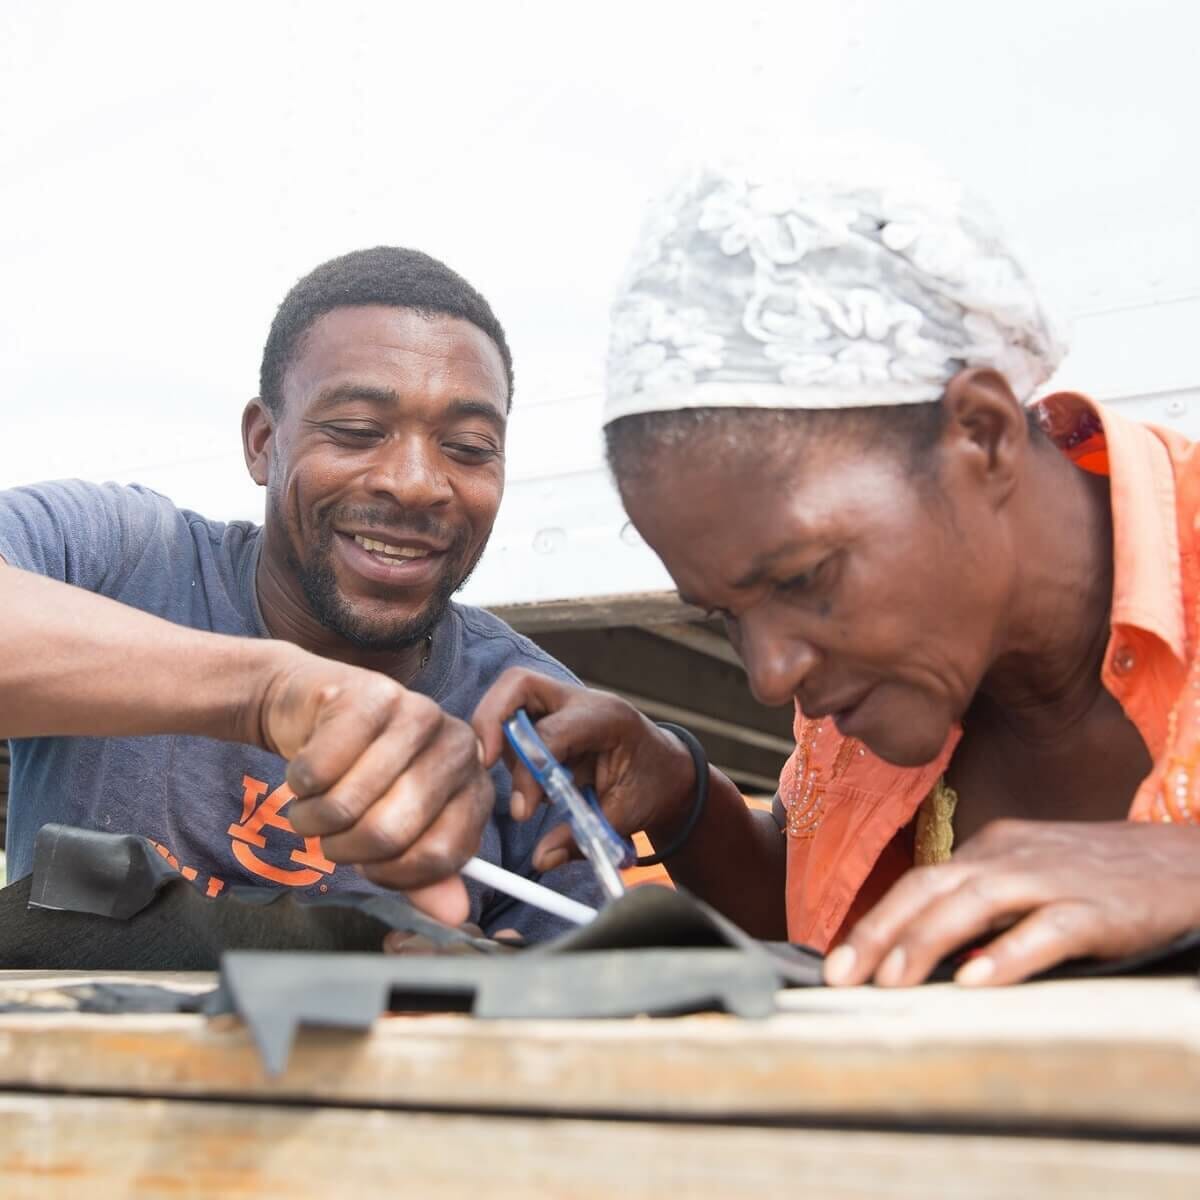 Two workers create sustainable tech gifts from salvaged materials